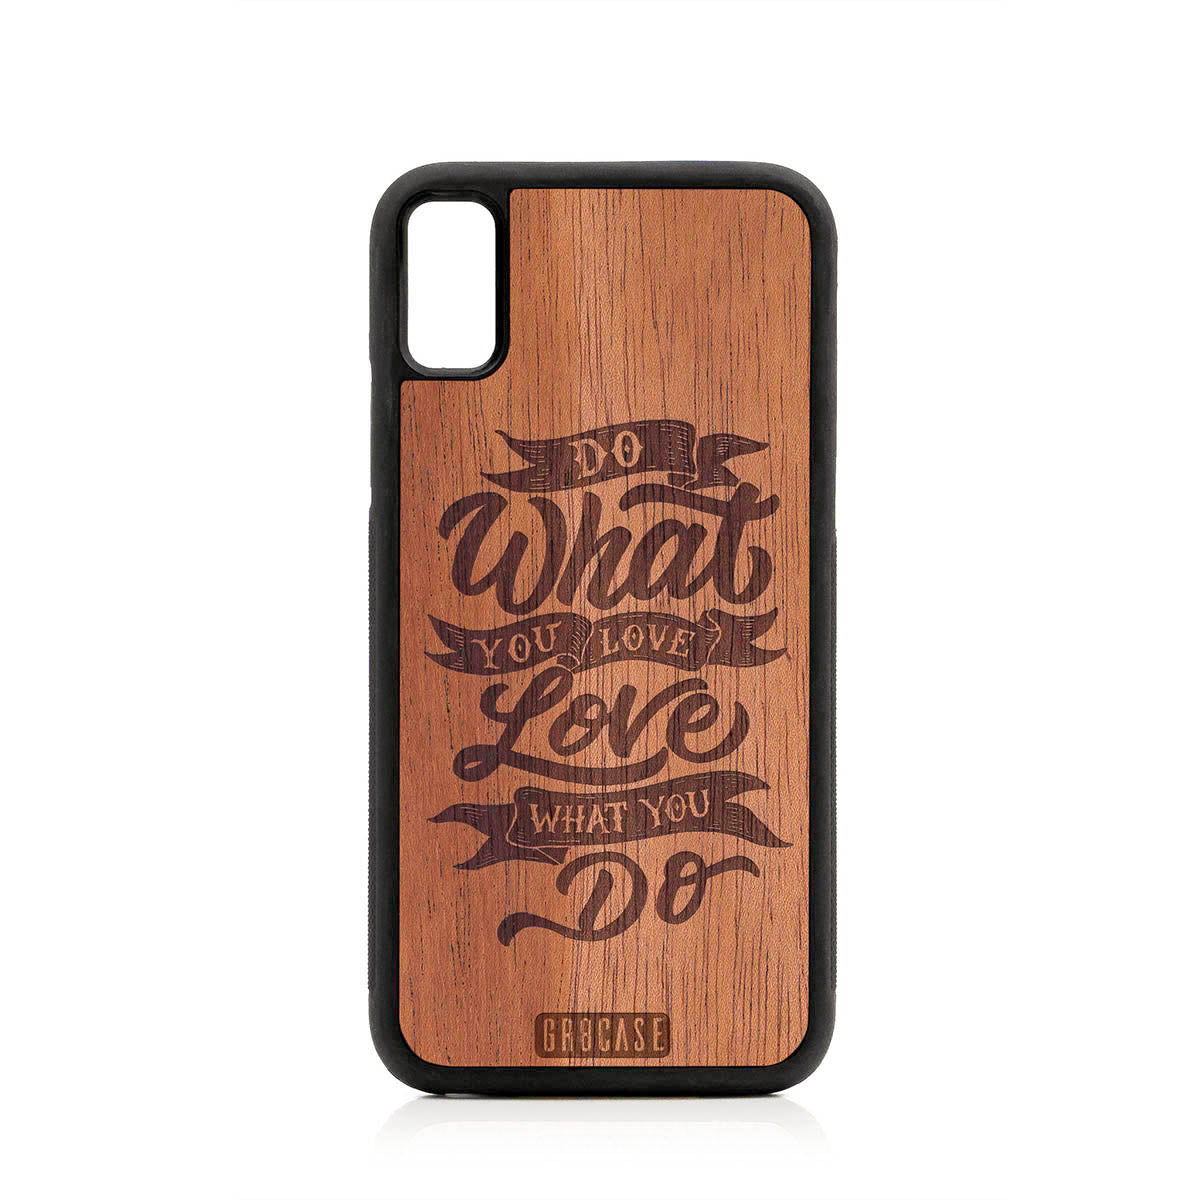 Do What You Love Love What You Do Design Wood Case For iPhone XS Max by GR8CASE